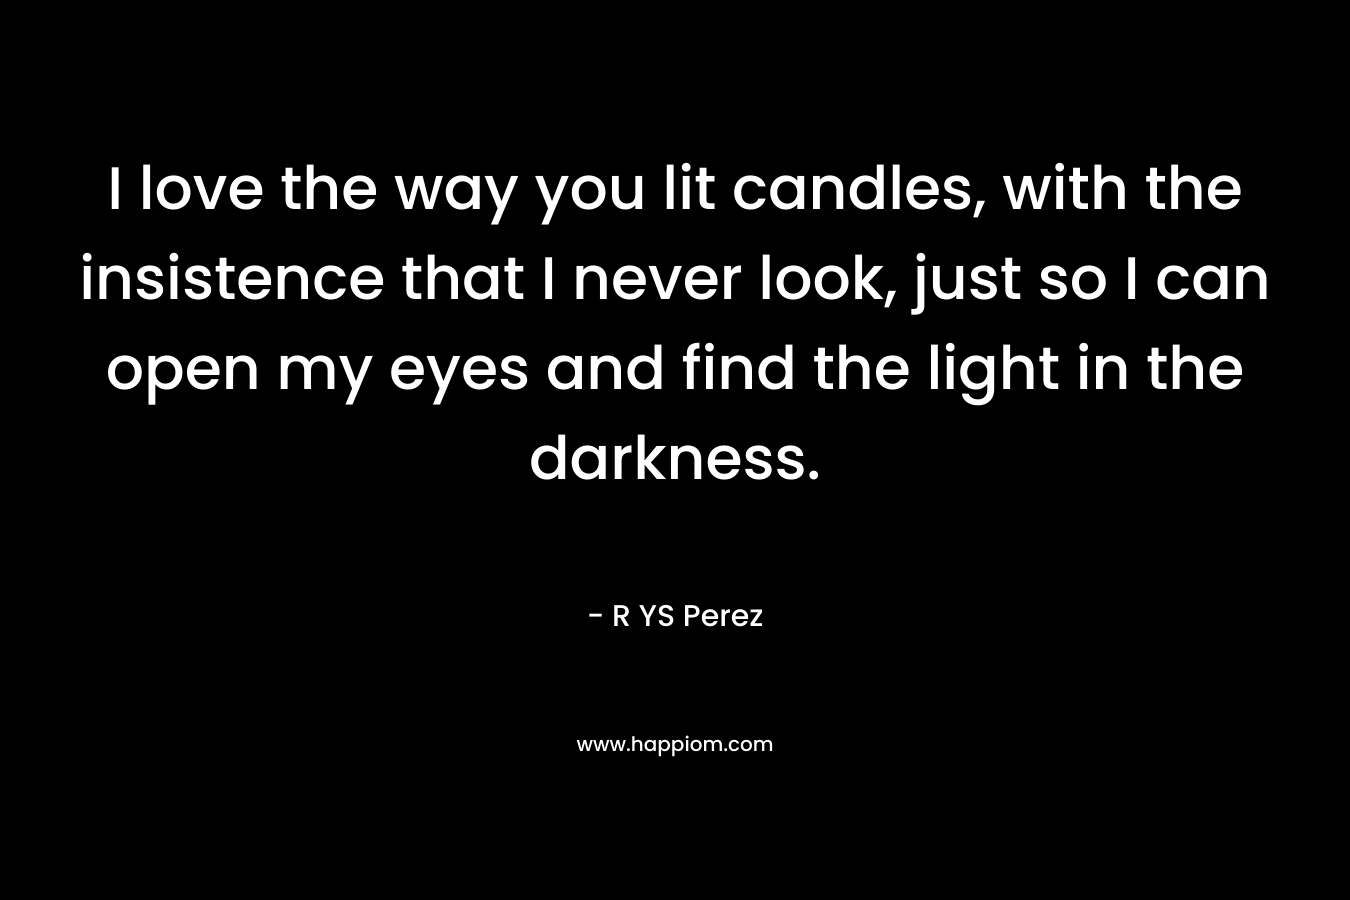 I love the way you lit candles, with the insistence that I never look, just so I can open my eyes and find the light in the darkness. – R YS Perez